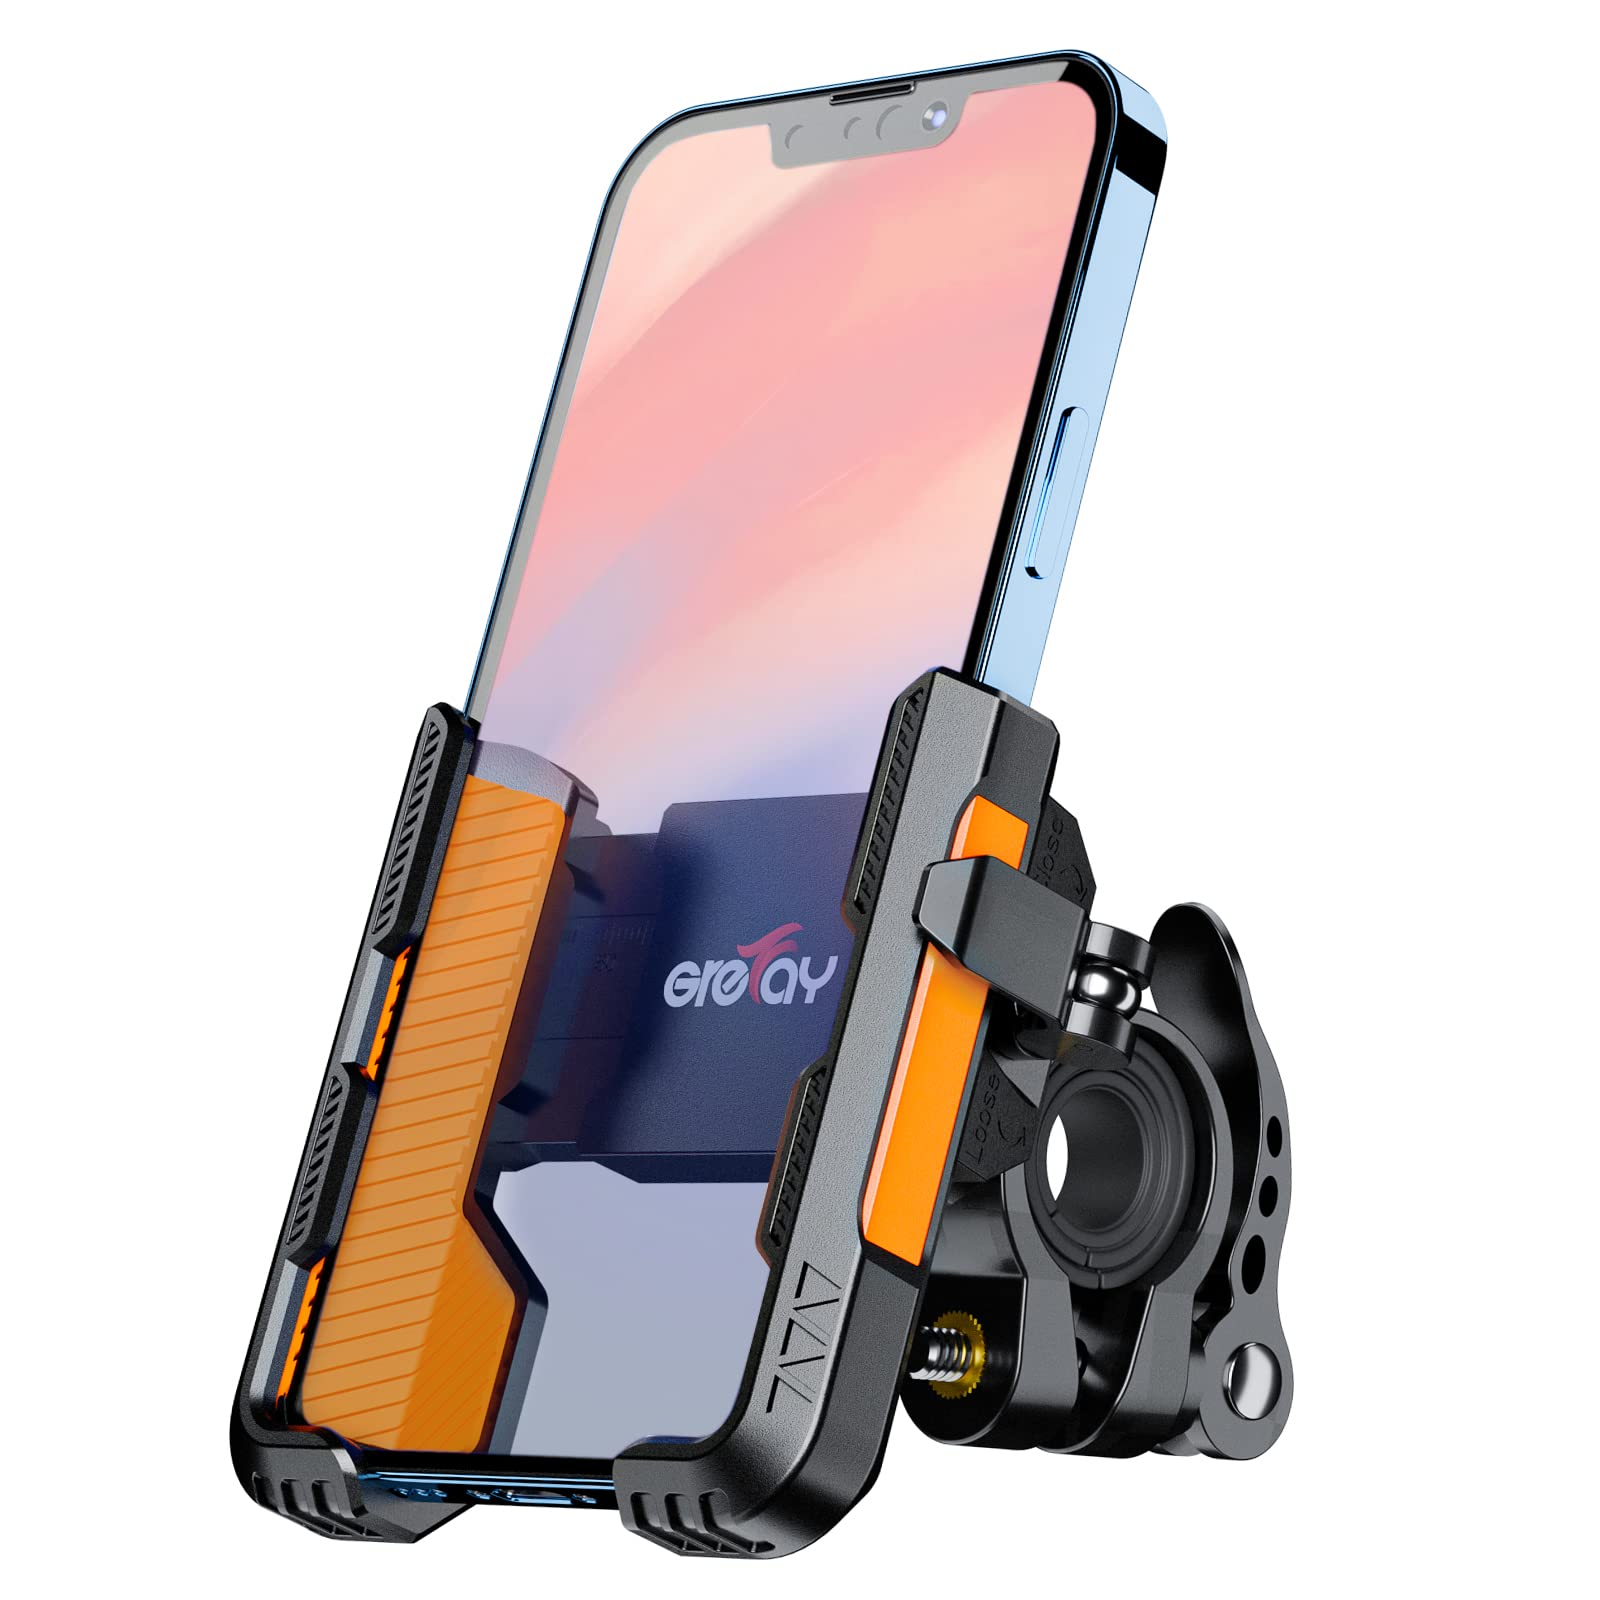 Grefay Bike Phone Mount【1S Quick Release】 Motorcycle Phone Mount Two Connectors for 20-40mm Handlebar 360° Rotatable Bicycle Motorcycle Scooter Suitable for 4.0